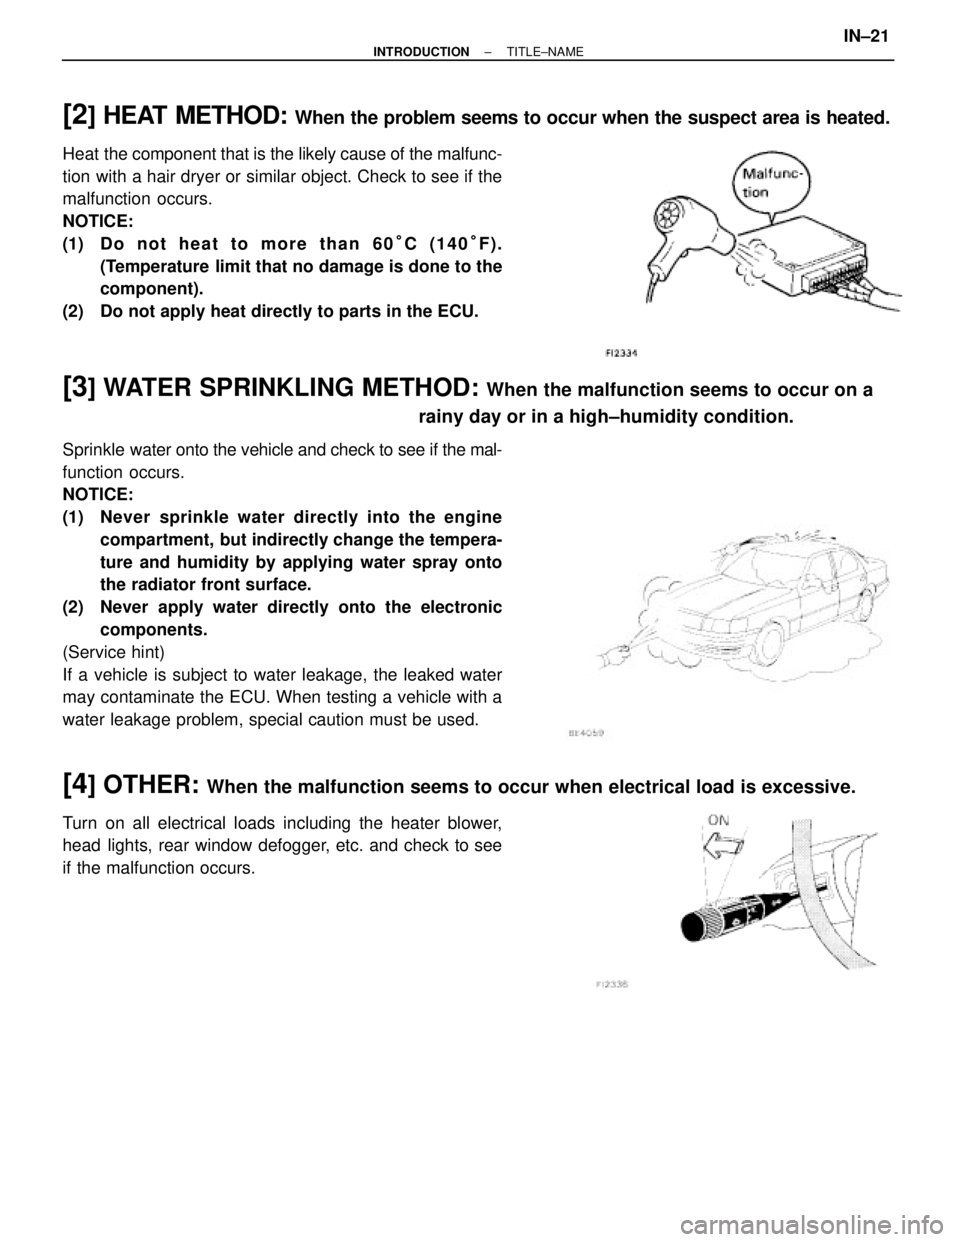 LEXUS SC300 1991  Service Owners Manual 
[2] HEAT METHOD: When the problem seems to occur when the suspect area is heated.
Heat the component that is the likely cause of the malfunc-
tion with a hair dryer or similar object. Check to see if